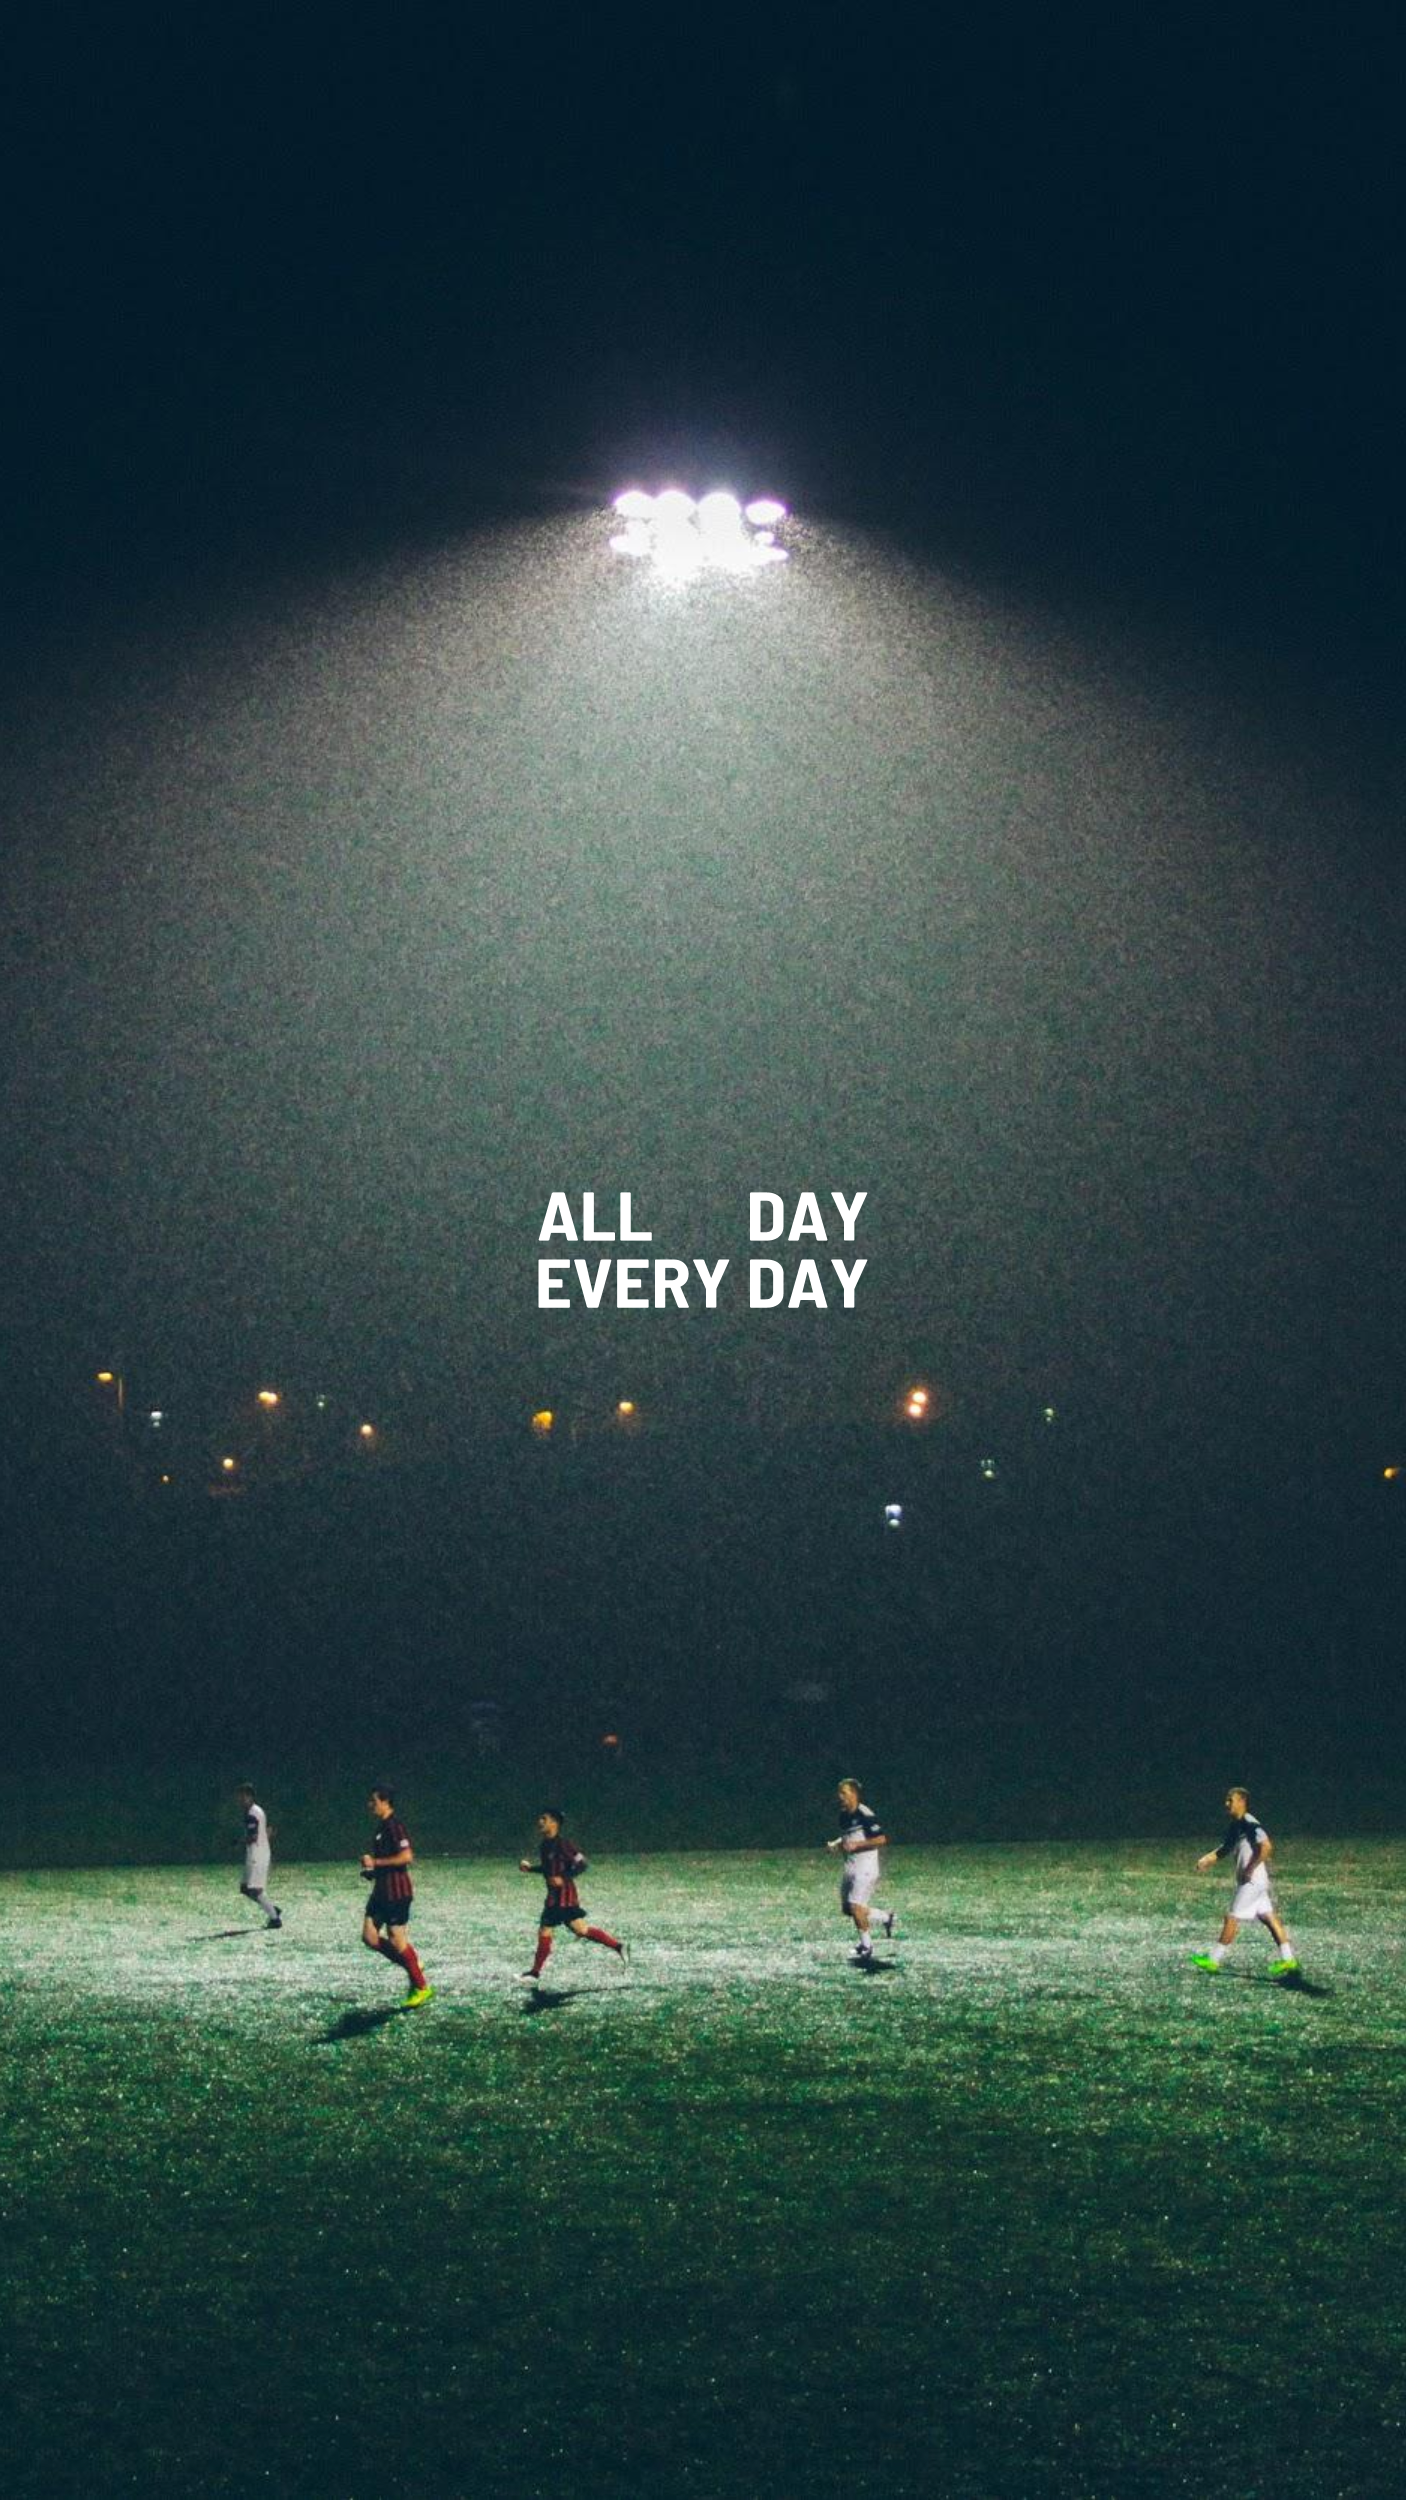 ALL DAY EVERY DAY. Soccer photography, Soccer background, Football wallpaper